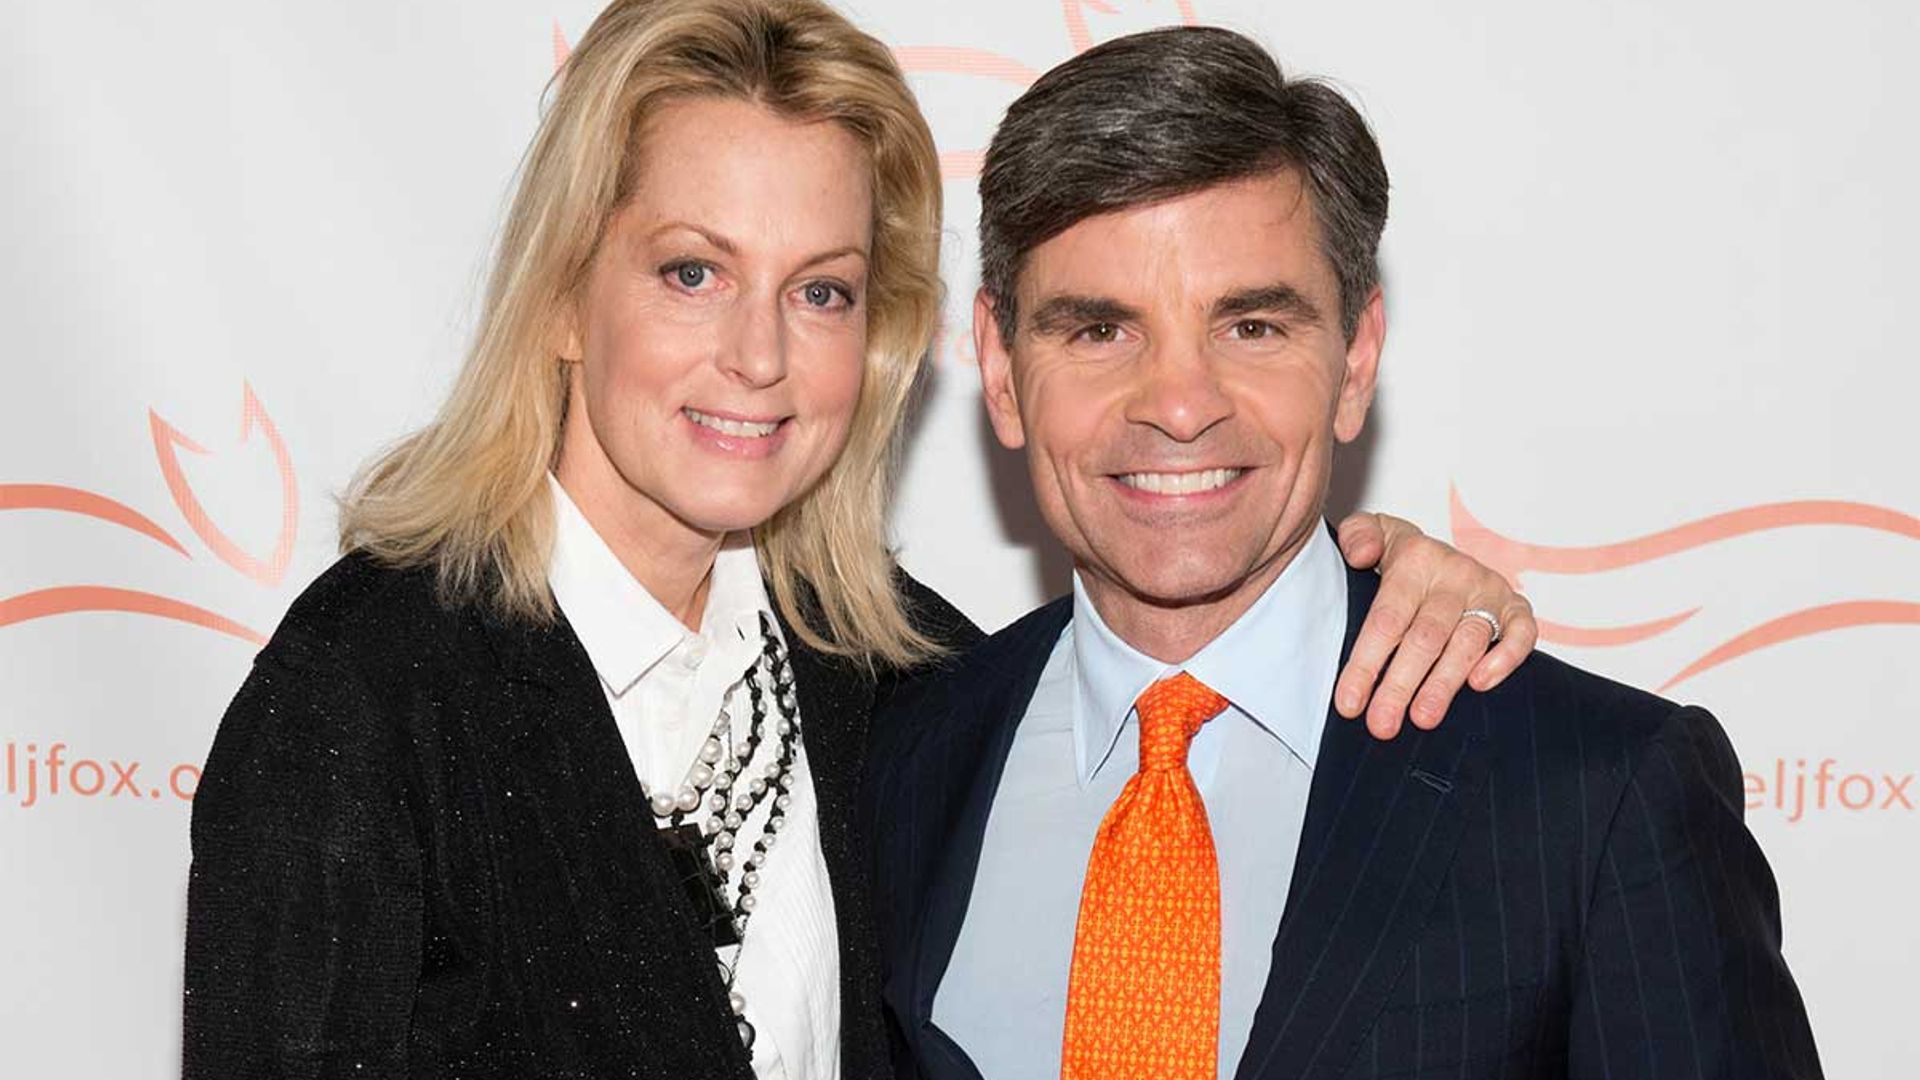 gma-george-stephanopoulos-ali-wentworth-family